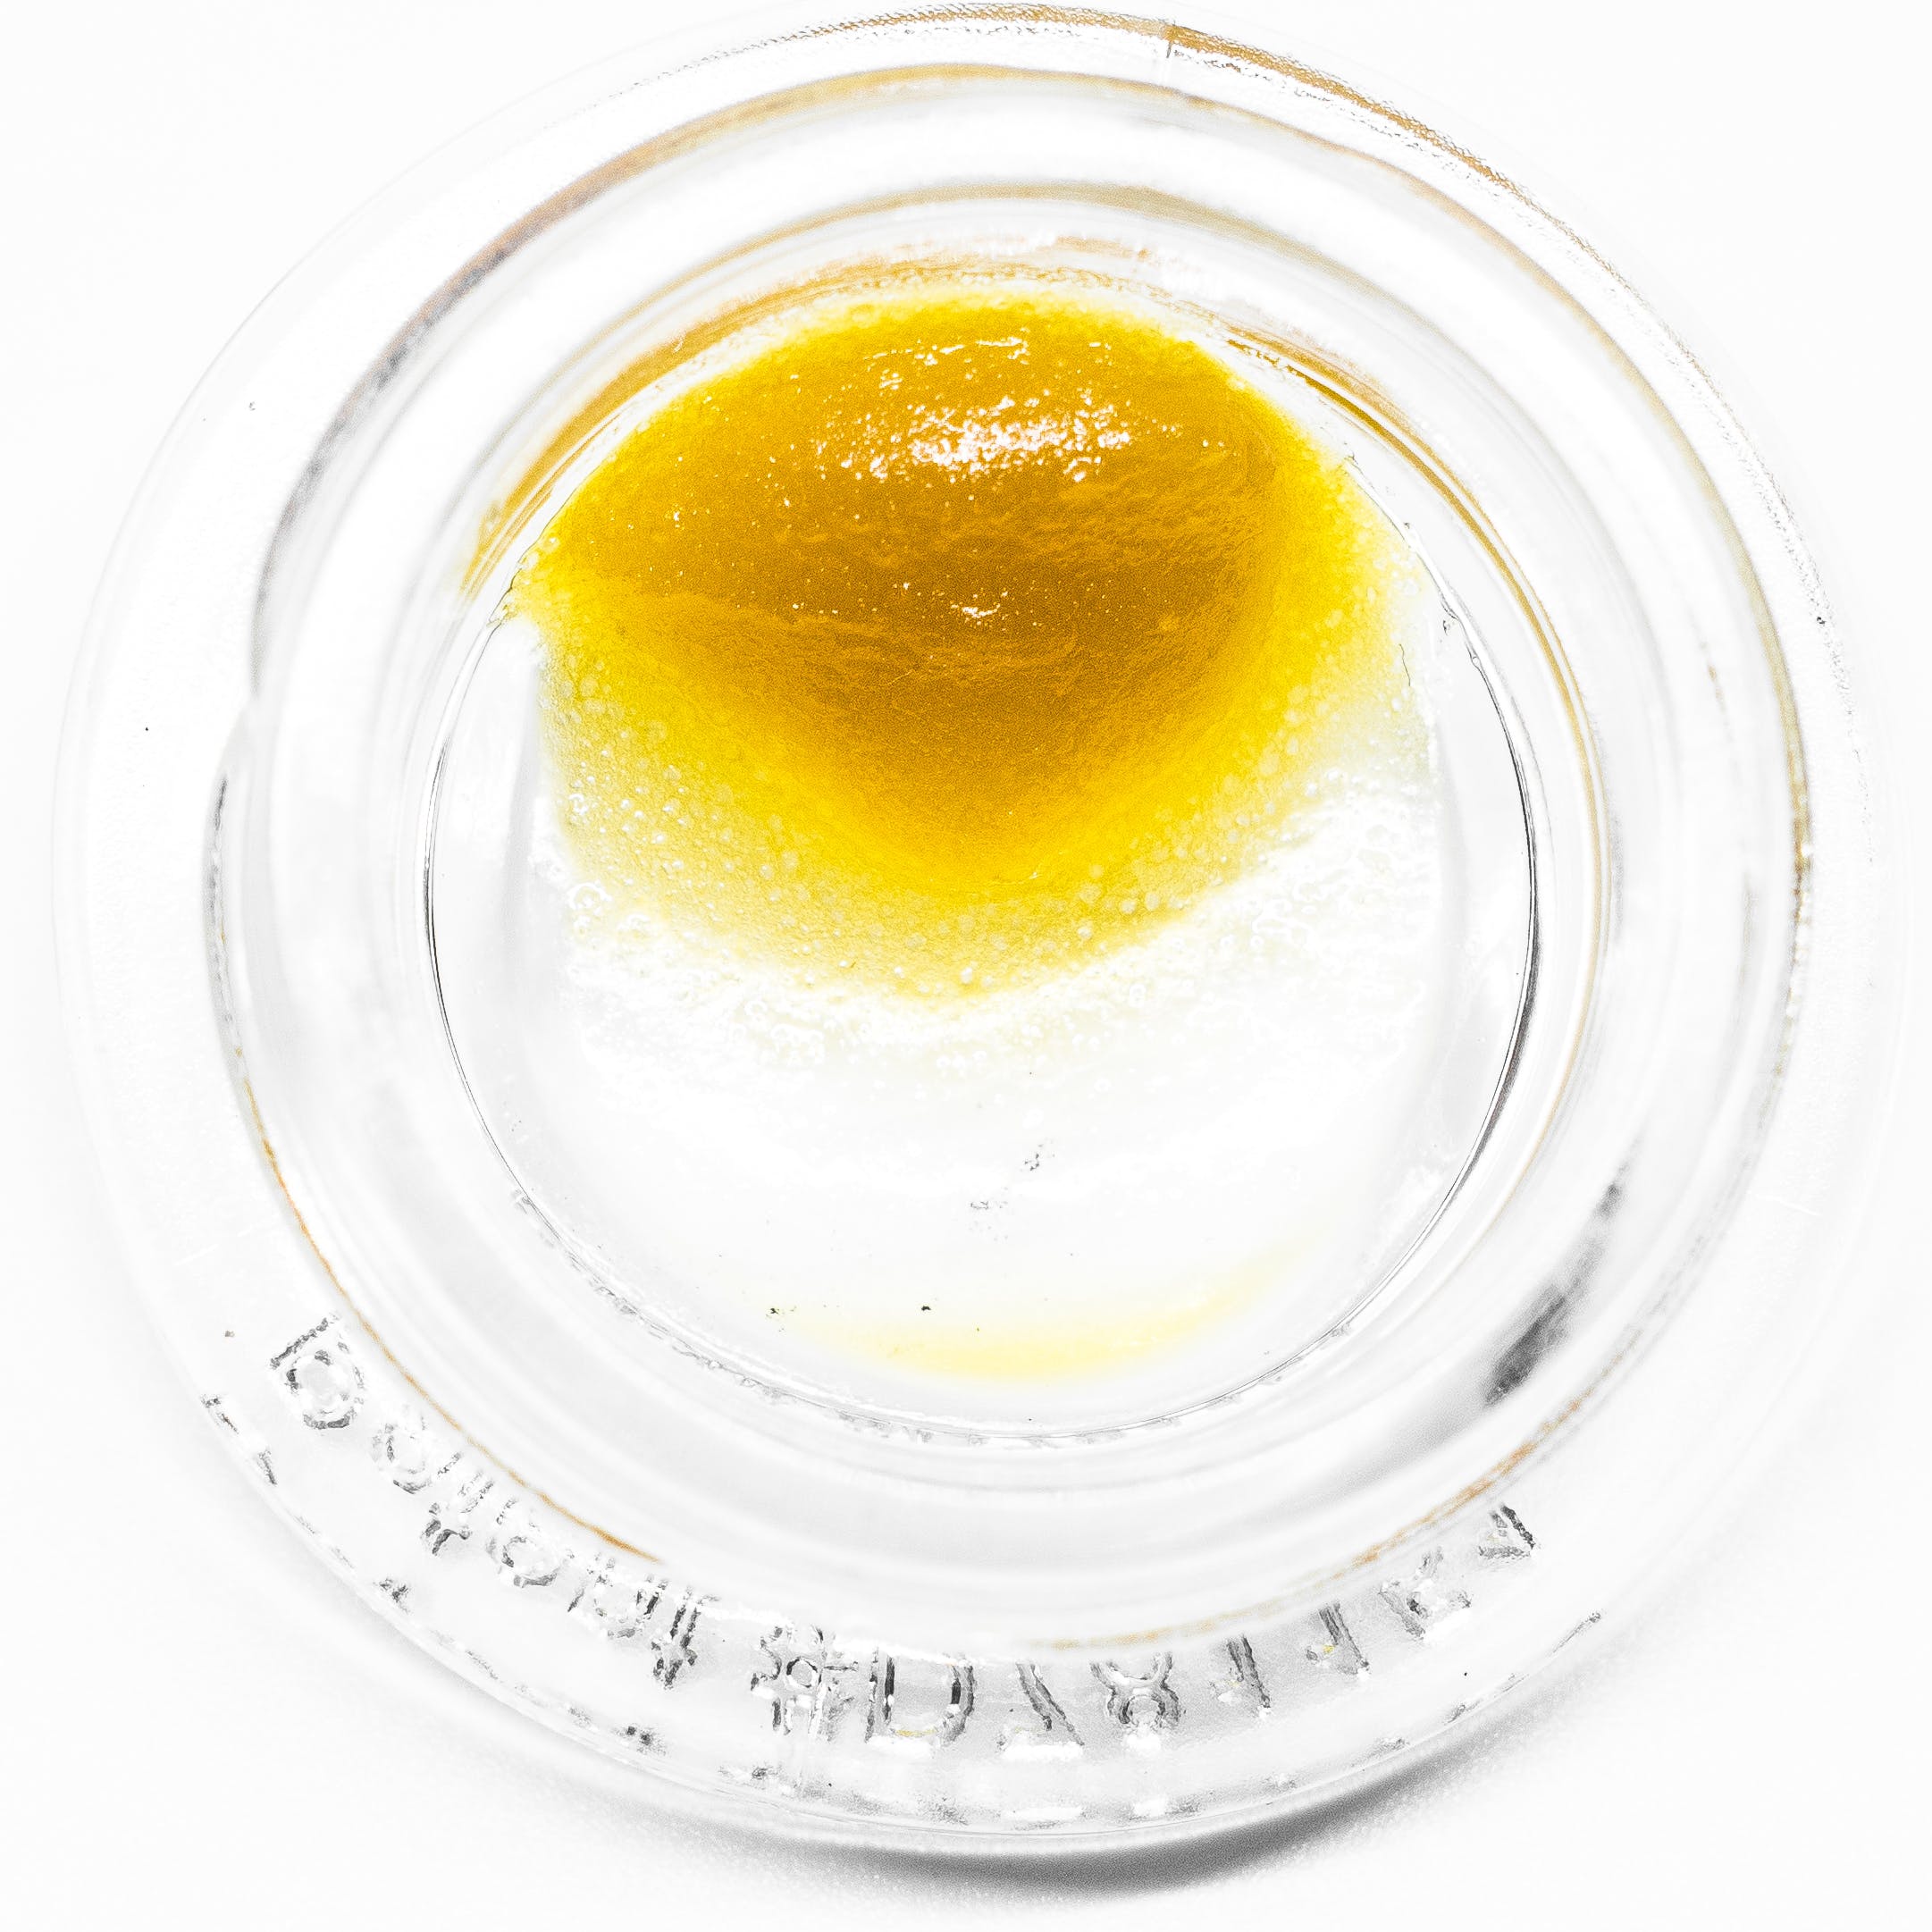 concentrate-2445-summit-afghani-live-resin-i-69-99-25-buy-one-2c-get-one-50-25-off